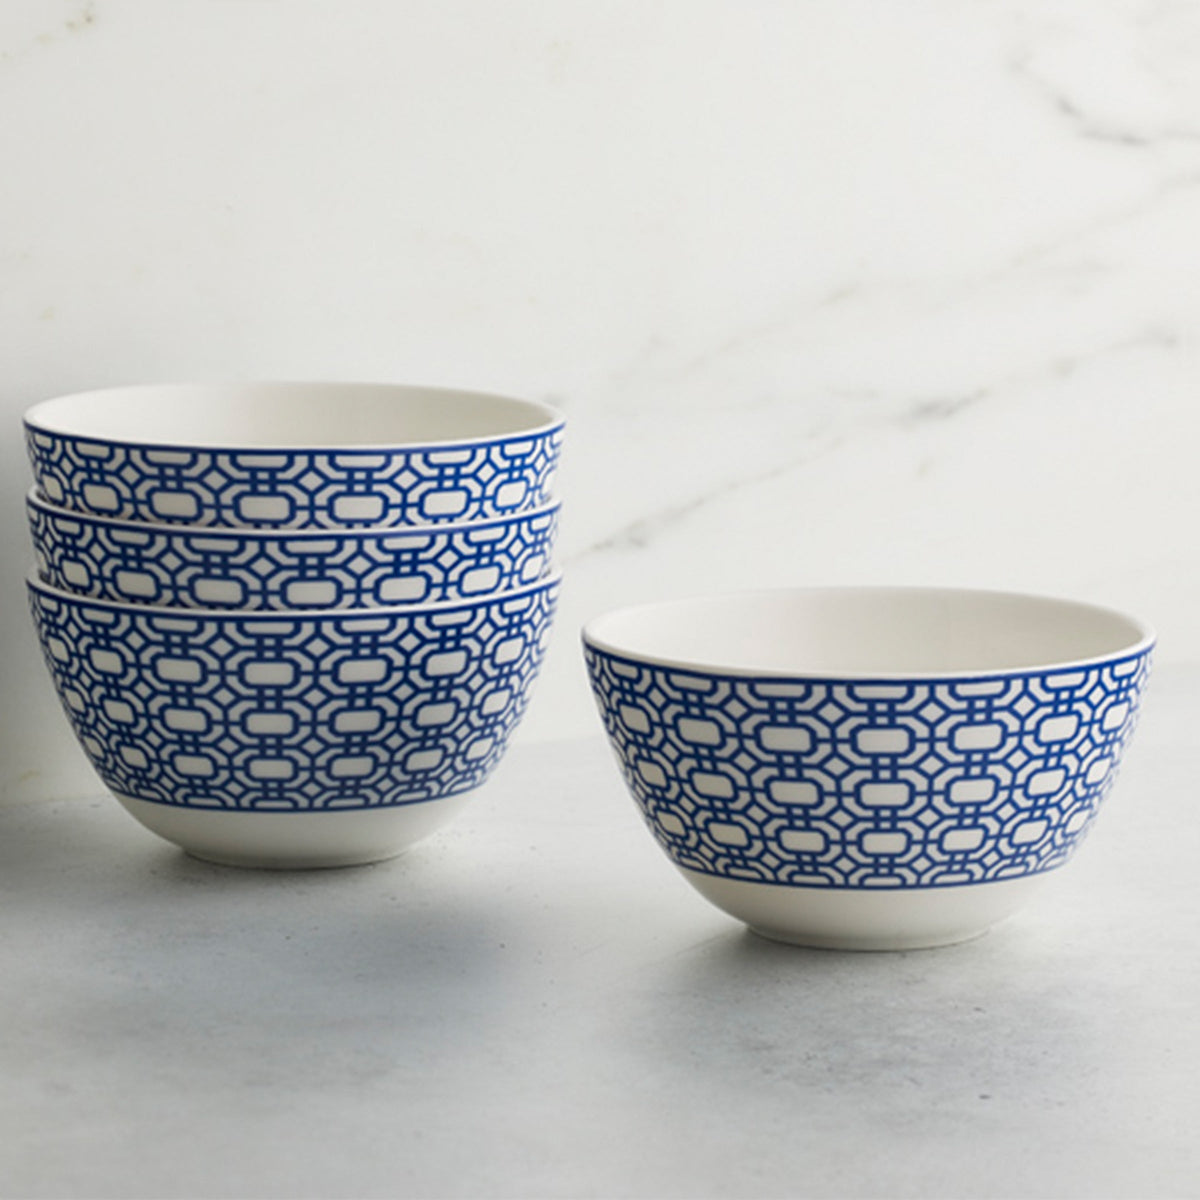 Four premium porcelain bowls with blue geometric patterns sit stacked, while one matching Newport Cereal Bowl from Caskata Artisanal Home is placed beside the stack, on a gray surface near a white marble background.